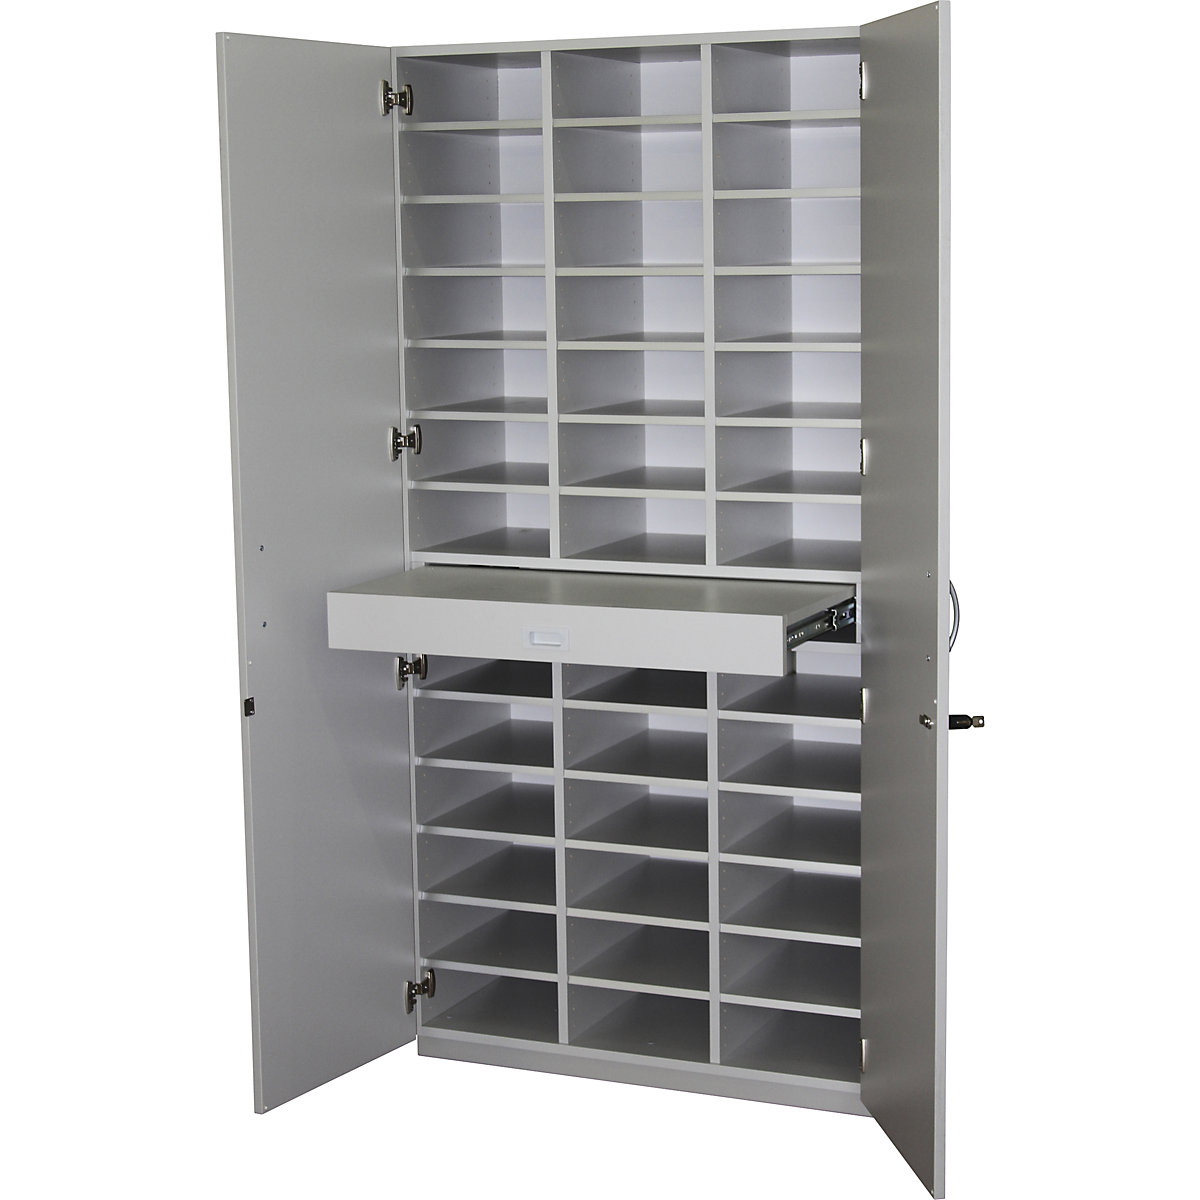 EUROKRAFTpro – Sorting cupboard with hinged doors and sorting table, HxWxD 1864 x 913 x 440 mm, 39 compartments, light grey RAL 7035